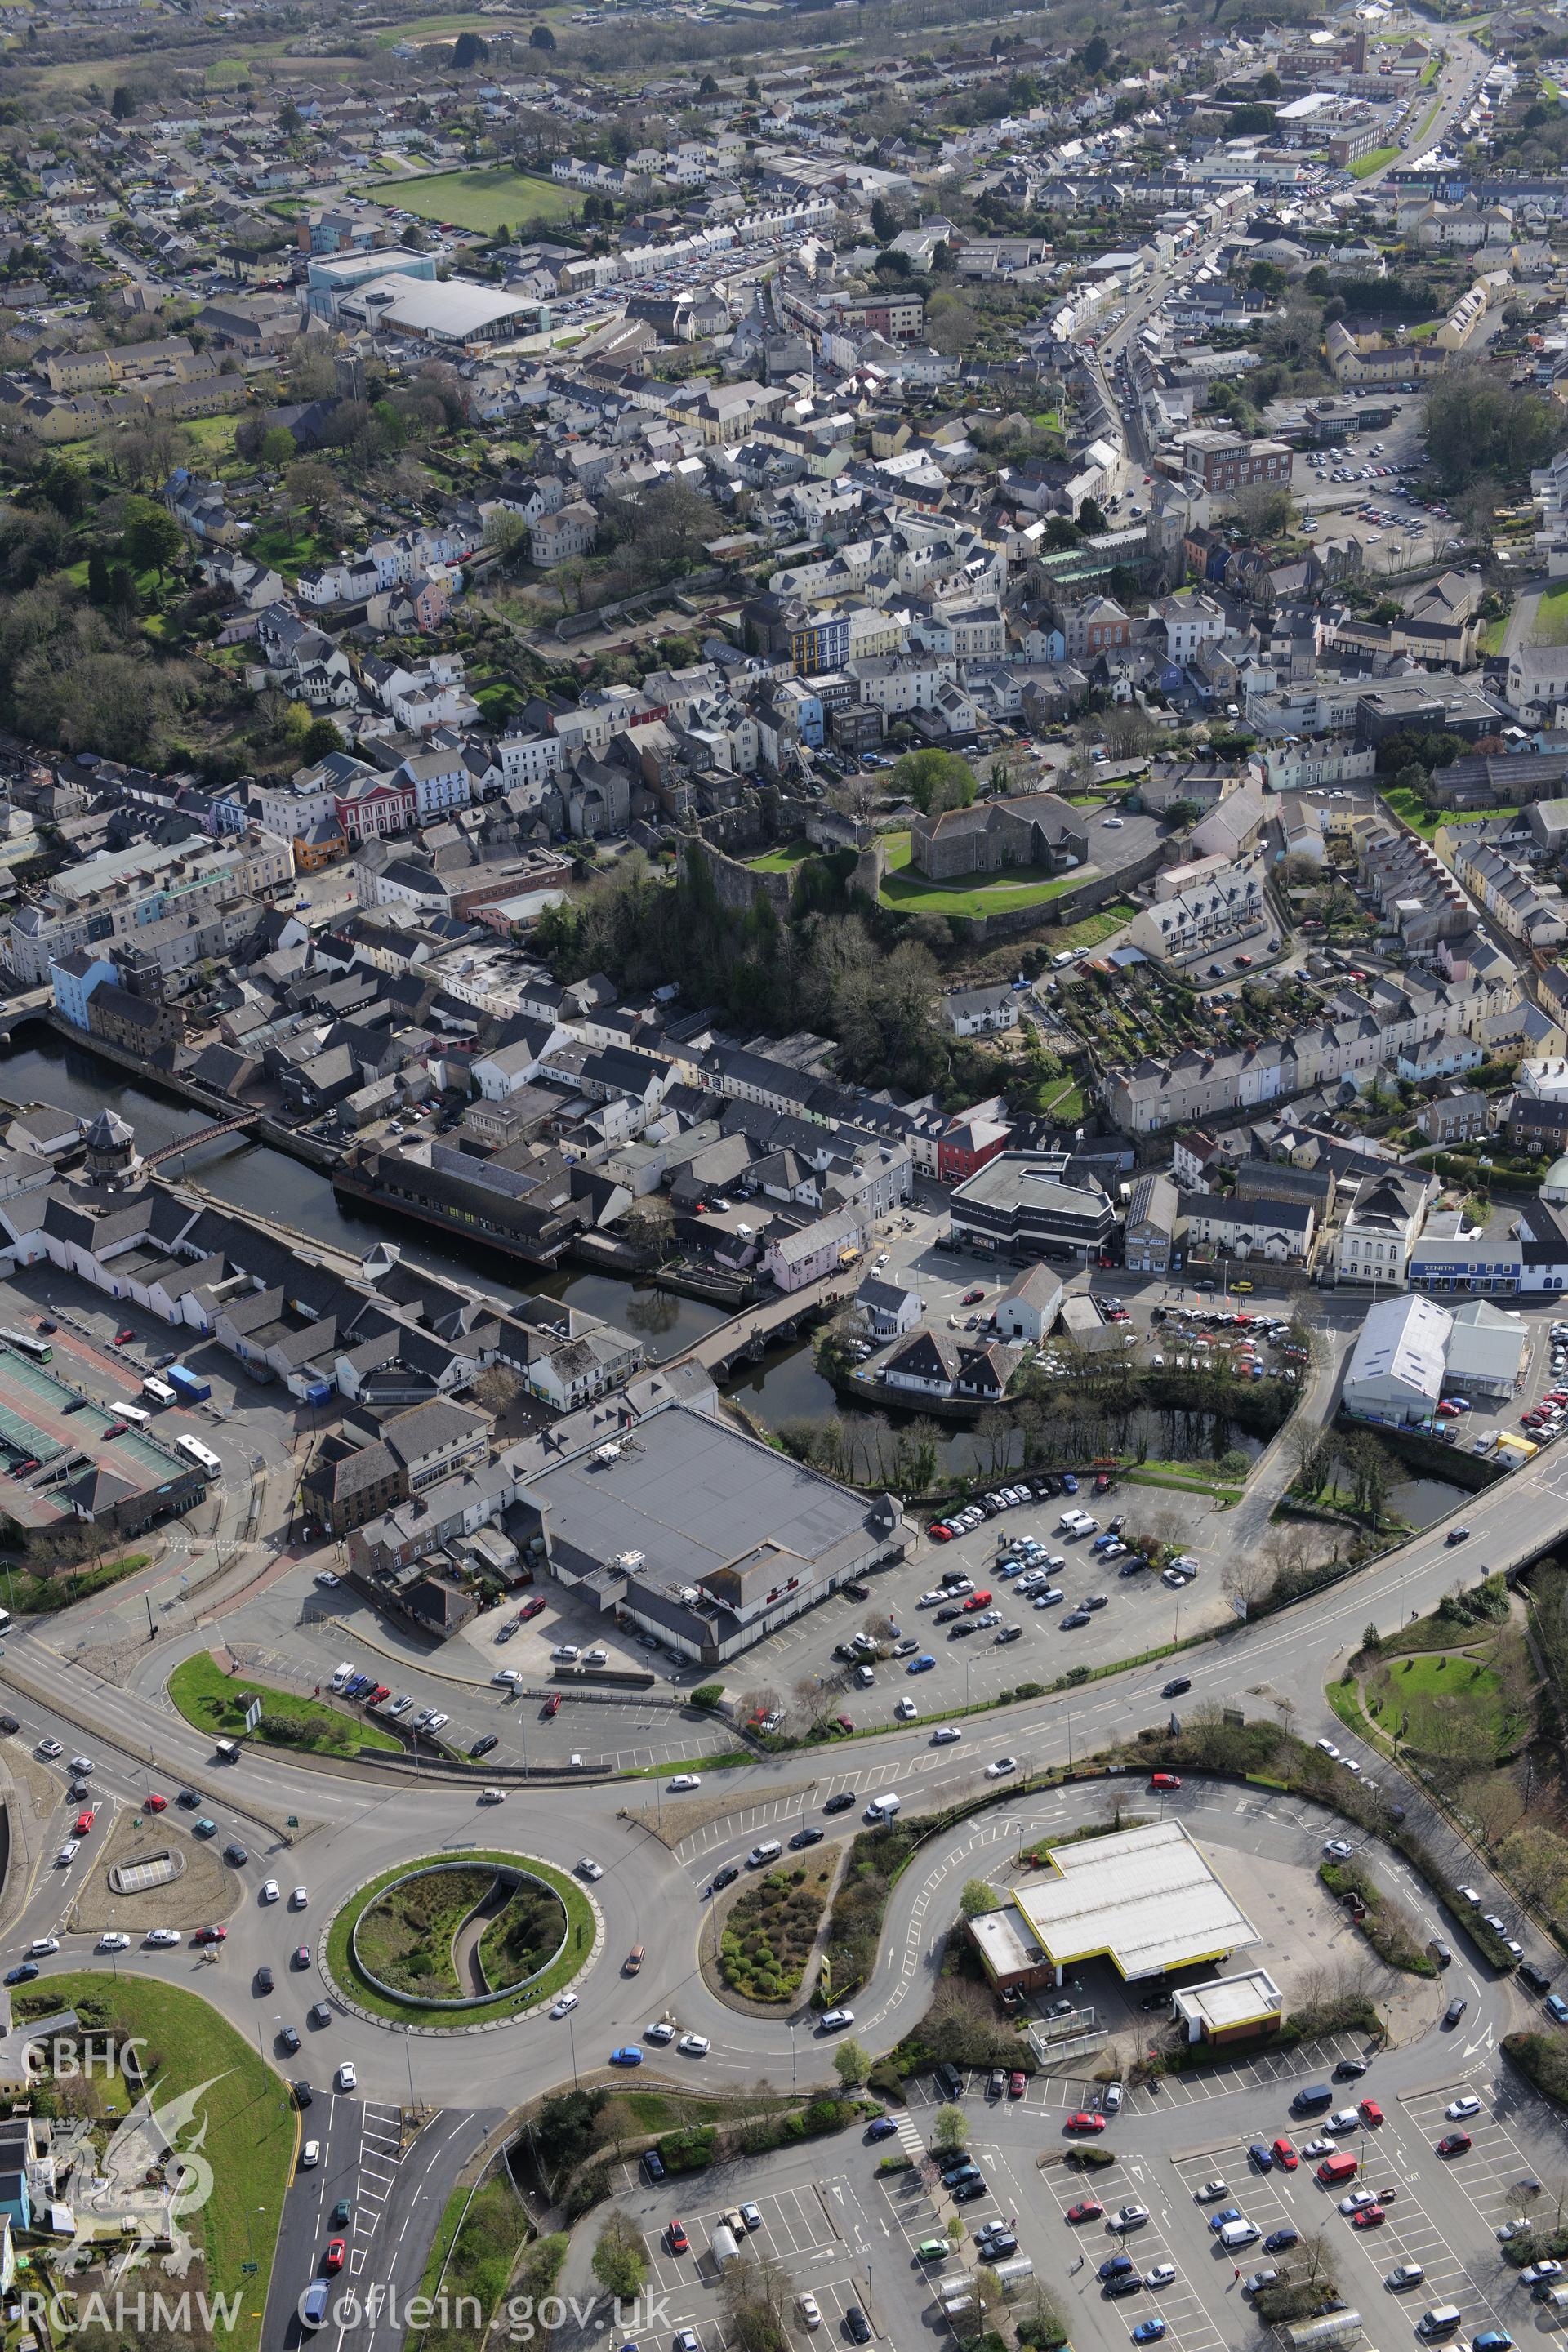 Haverford West, Haverfordwest Castle, (former) Gaol and Old Bridge. Oblique aerial photograph taken during the Royal Commission's programme of archaeological aerial reconnaissance by Toby Driver on 15th April 2015